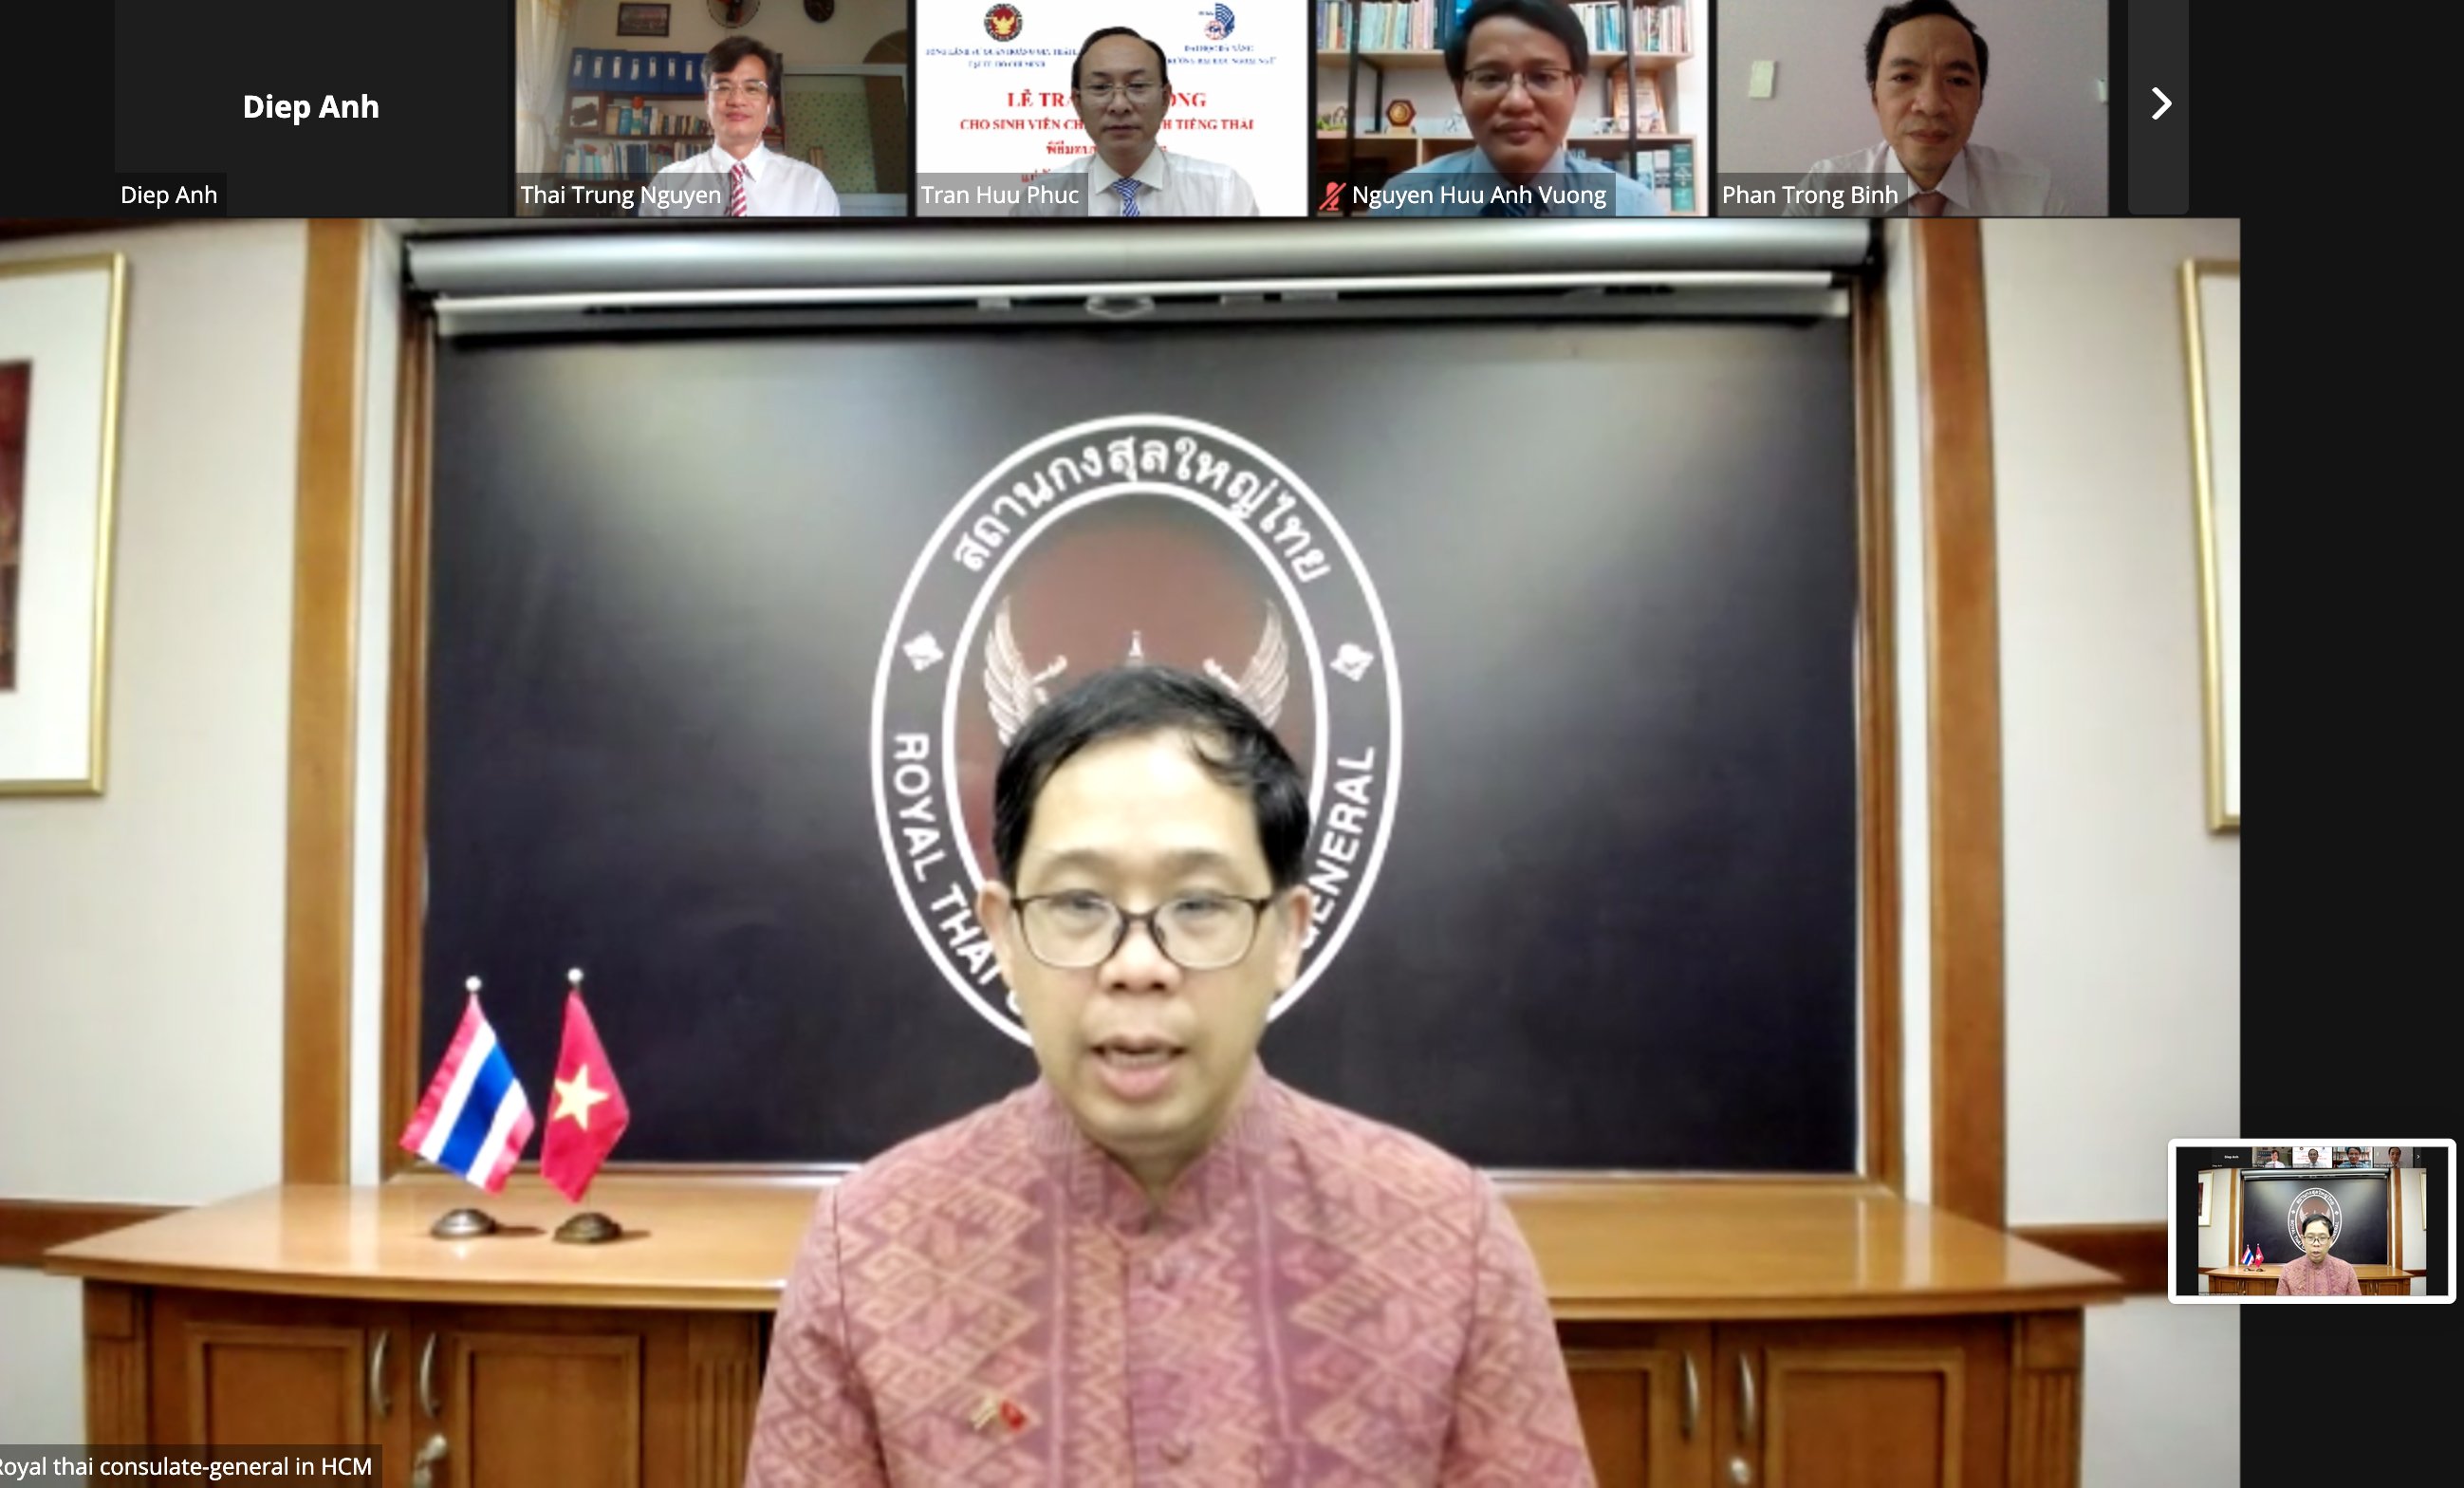 Mr. Apirat Sugondhabhirom, the Consul-General of Thailand to Ho Chi Minh City, delivers his address at the online Scholarship Awards Ceremony.